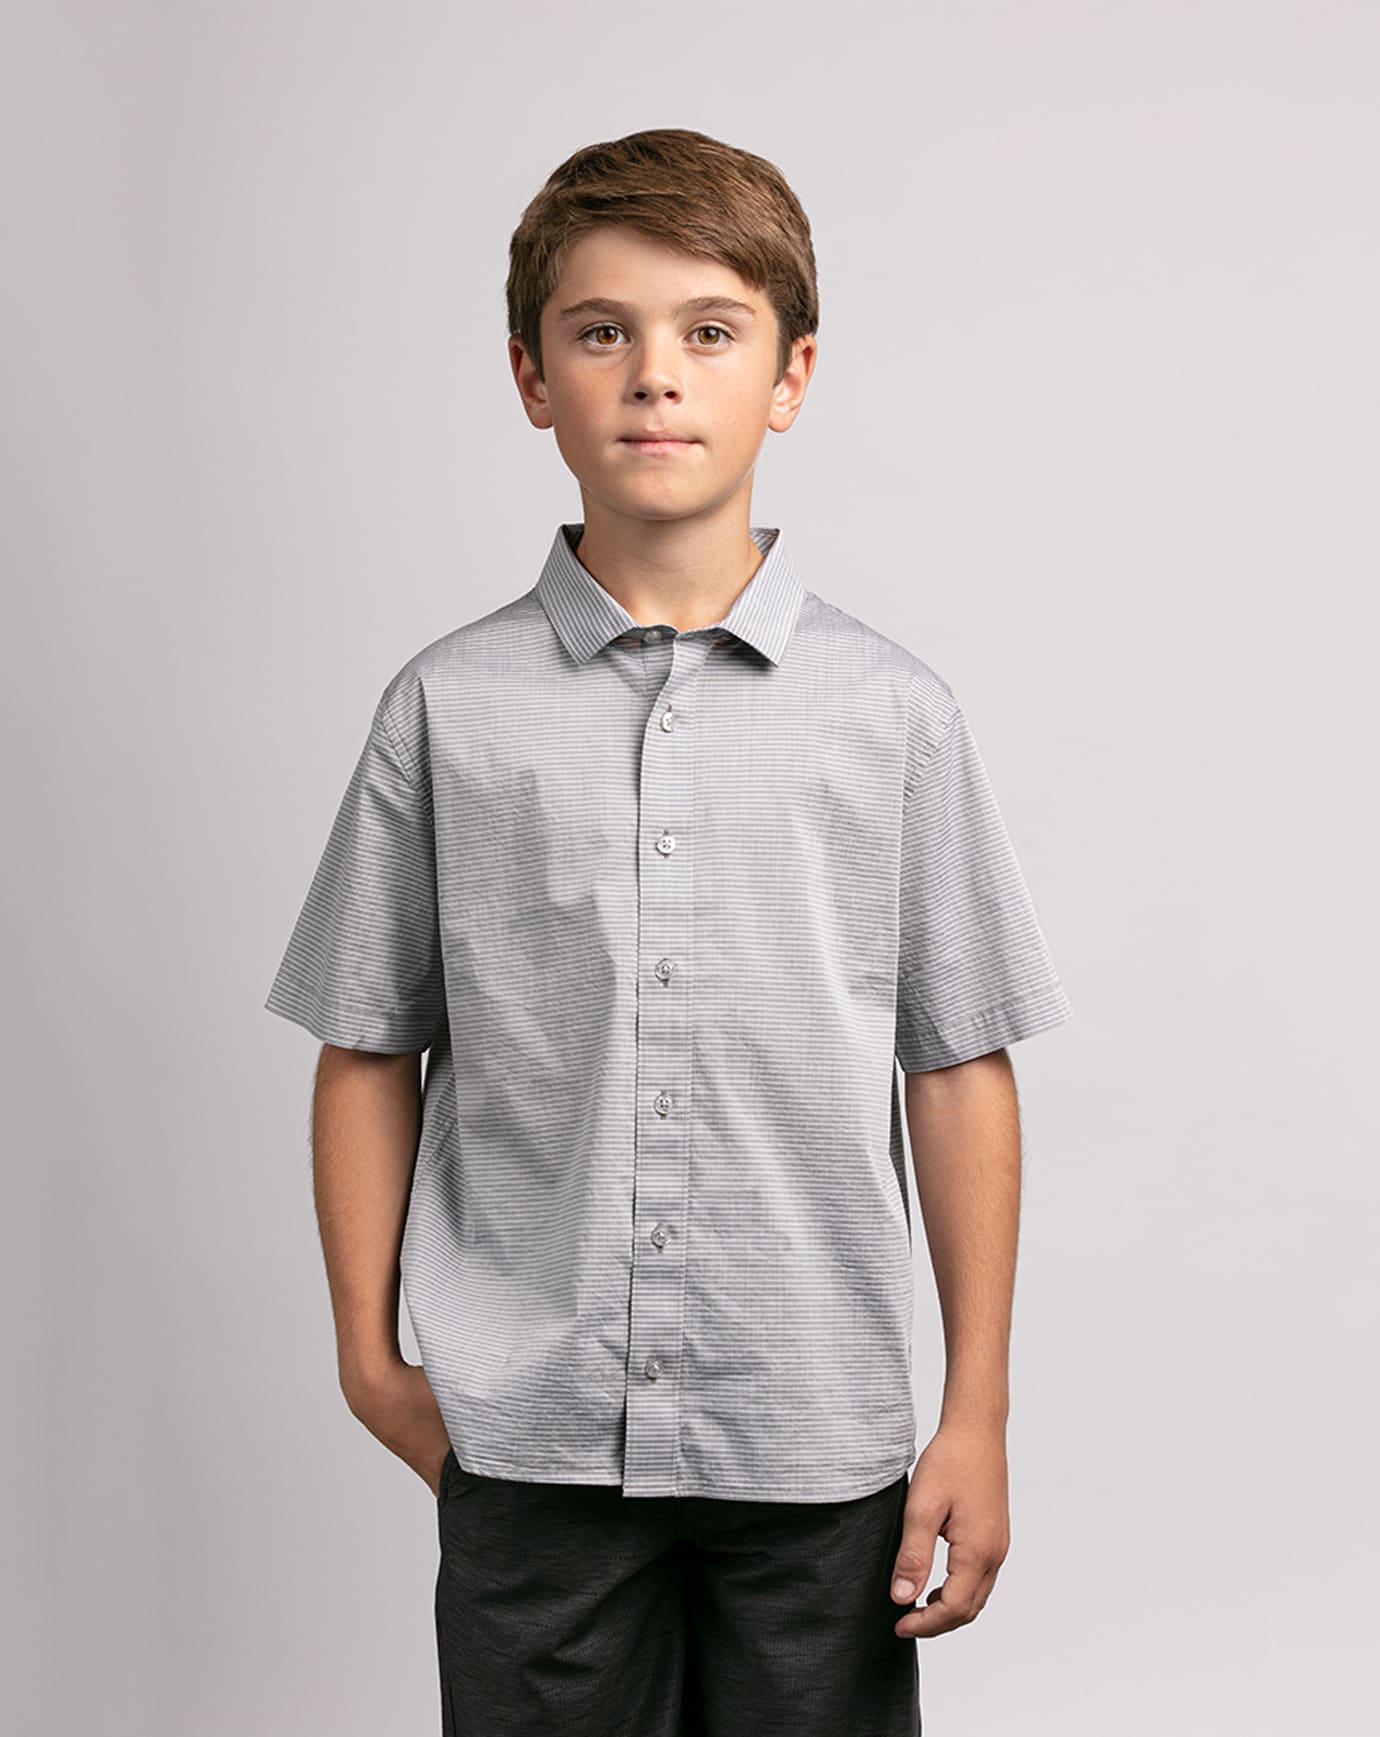 THE TAKE AWAY YOUTH BUTTON-DOWN